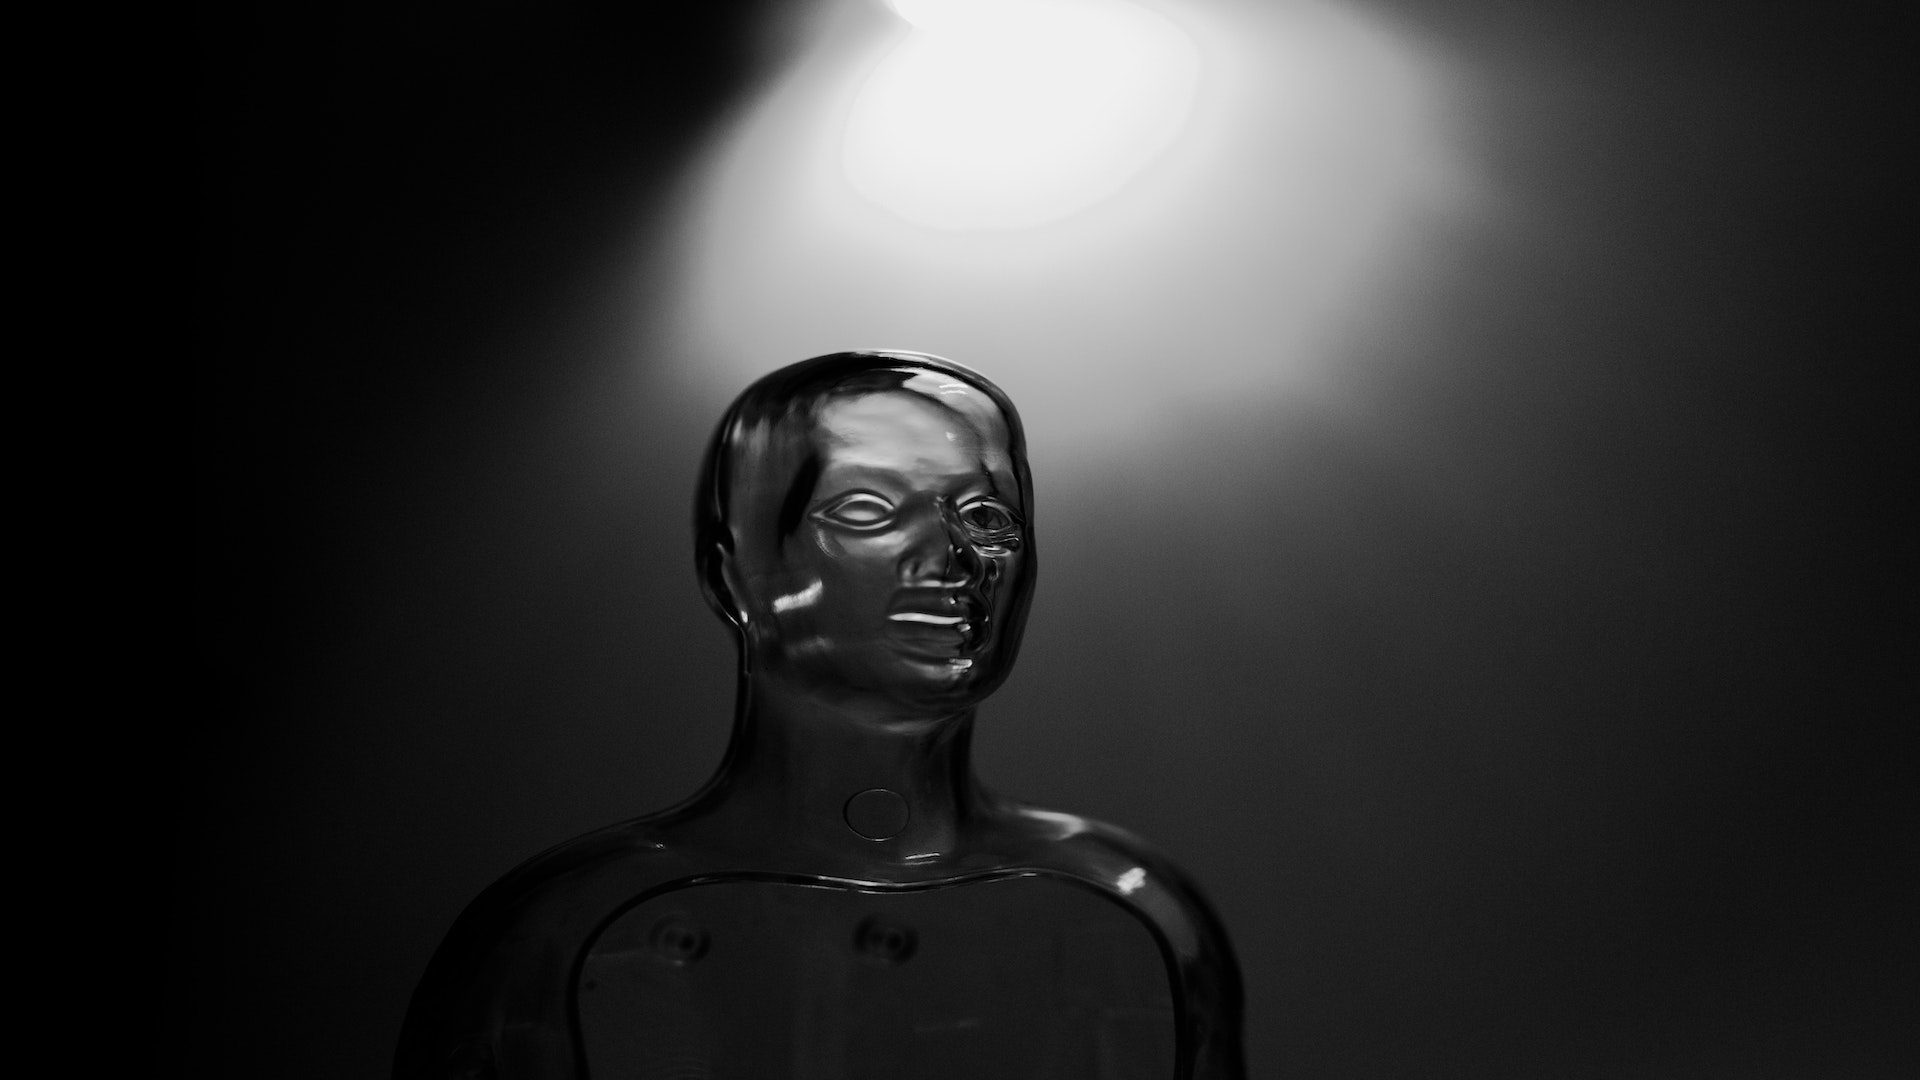 Mannequin in black and white